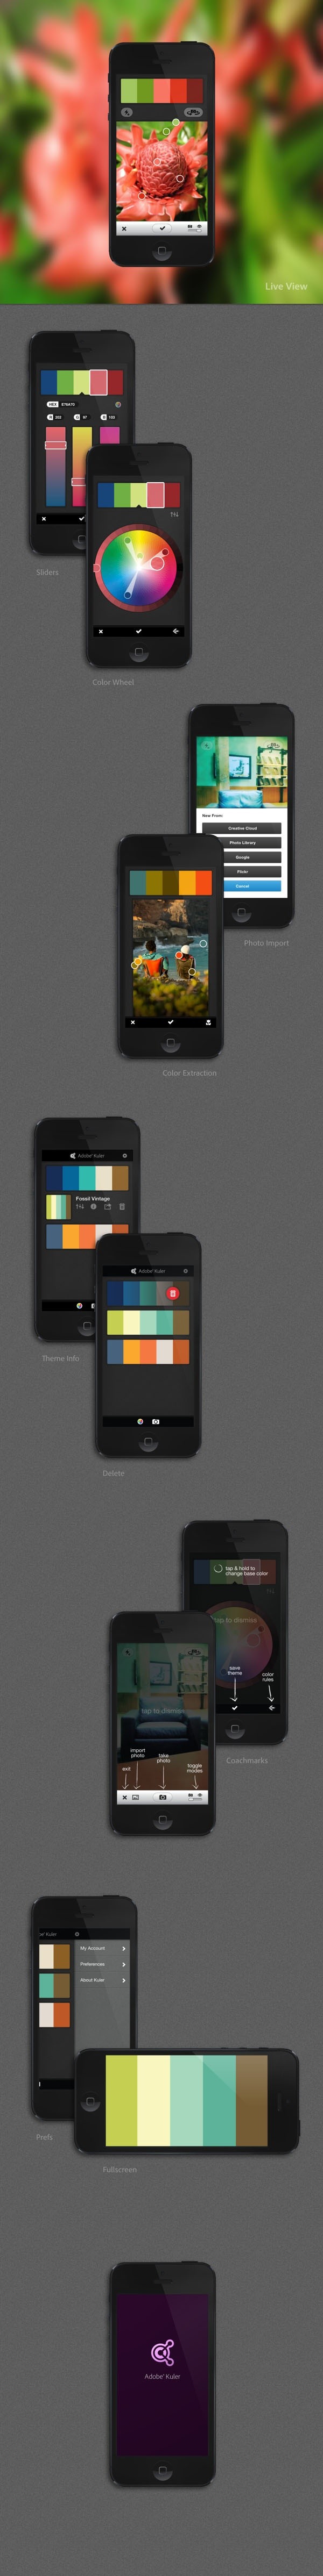 Adobe Kuler (iPhone app) - for creating color sche...